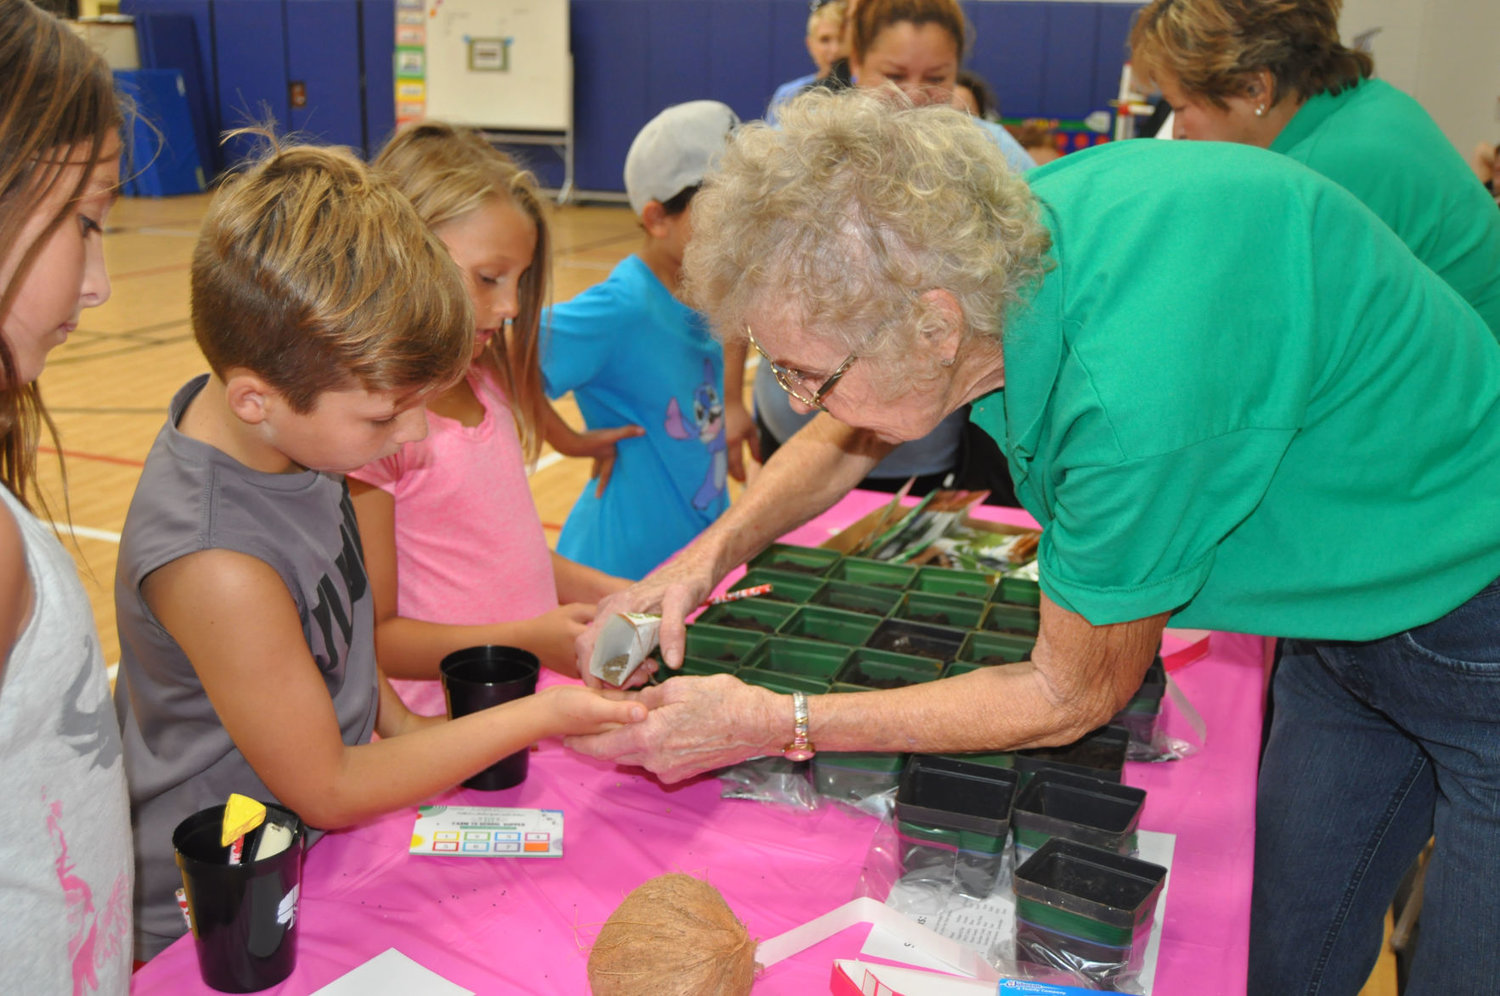 Montgomery County Master Gardener Anita Arnold, right, gives herb seeds to Logan Lowe Tuesday at Nicholson Elementary School. The Master Gardeners showed families how to plant herbs to kick off National Farm-to-School Month.